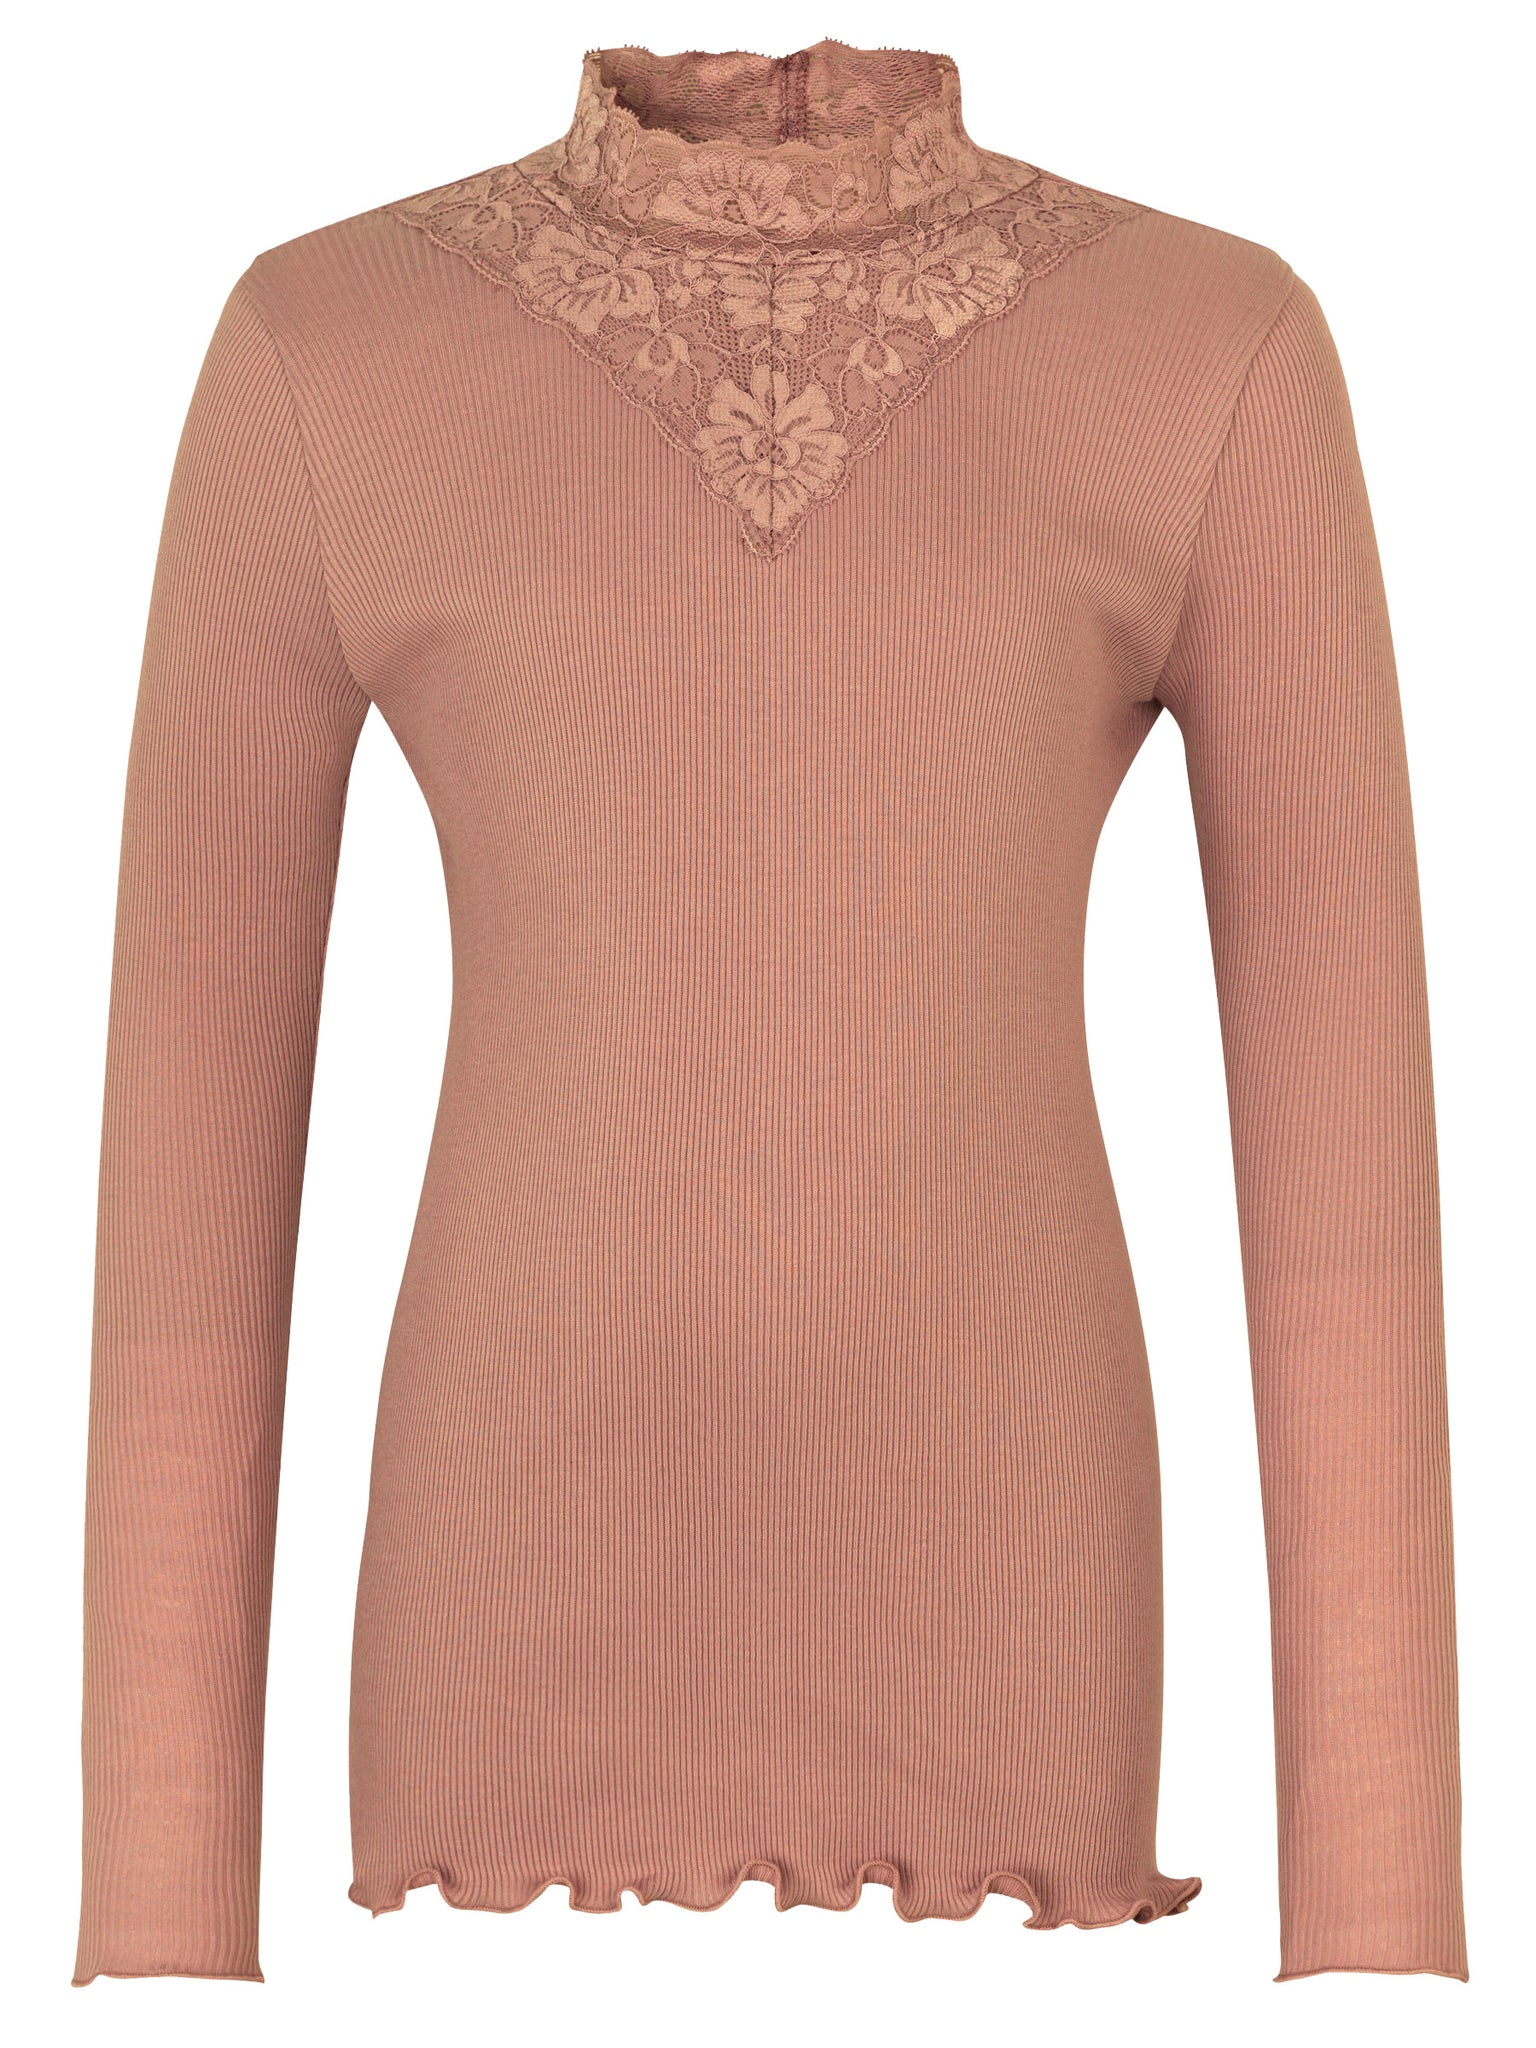 Organic lace blouse for girls